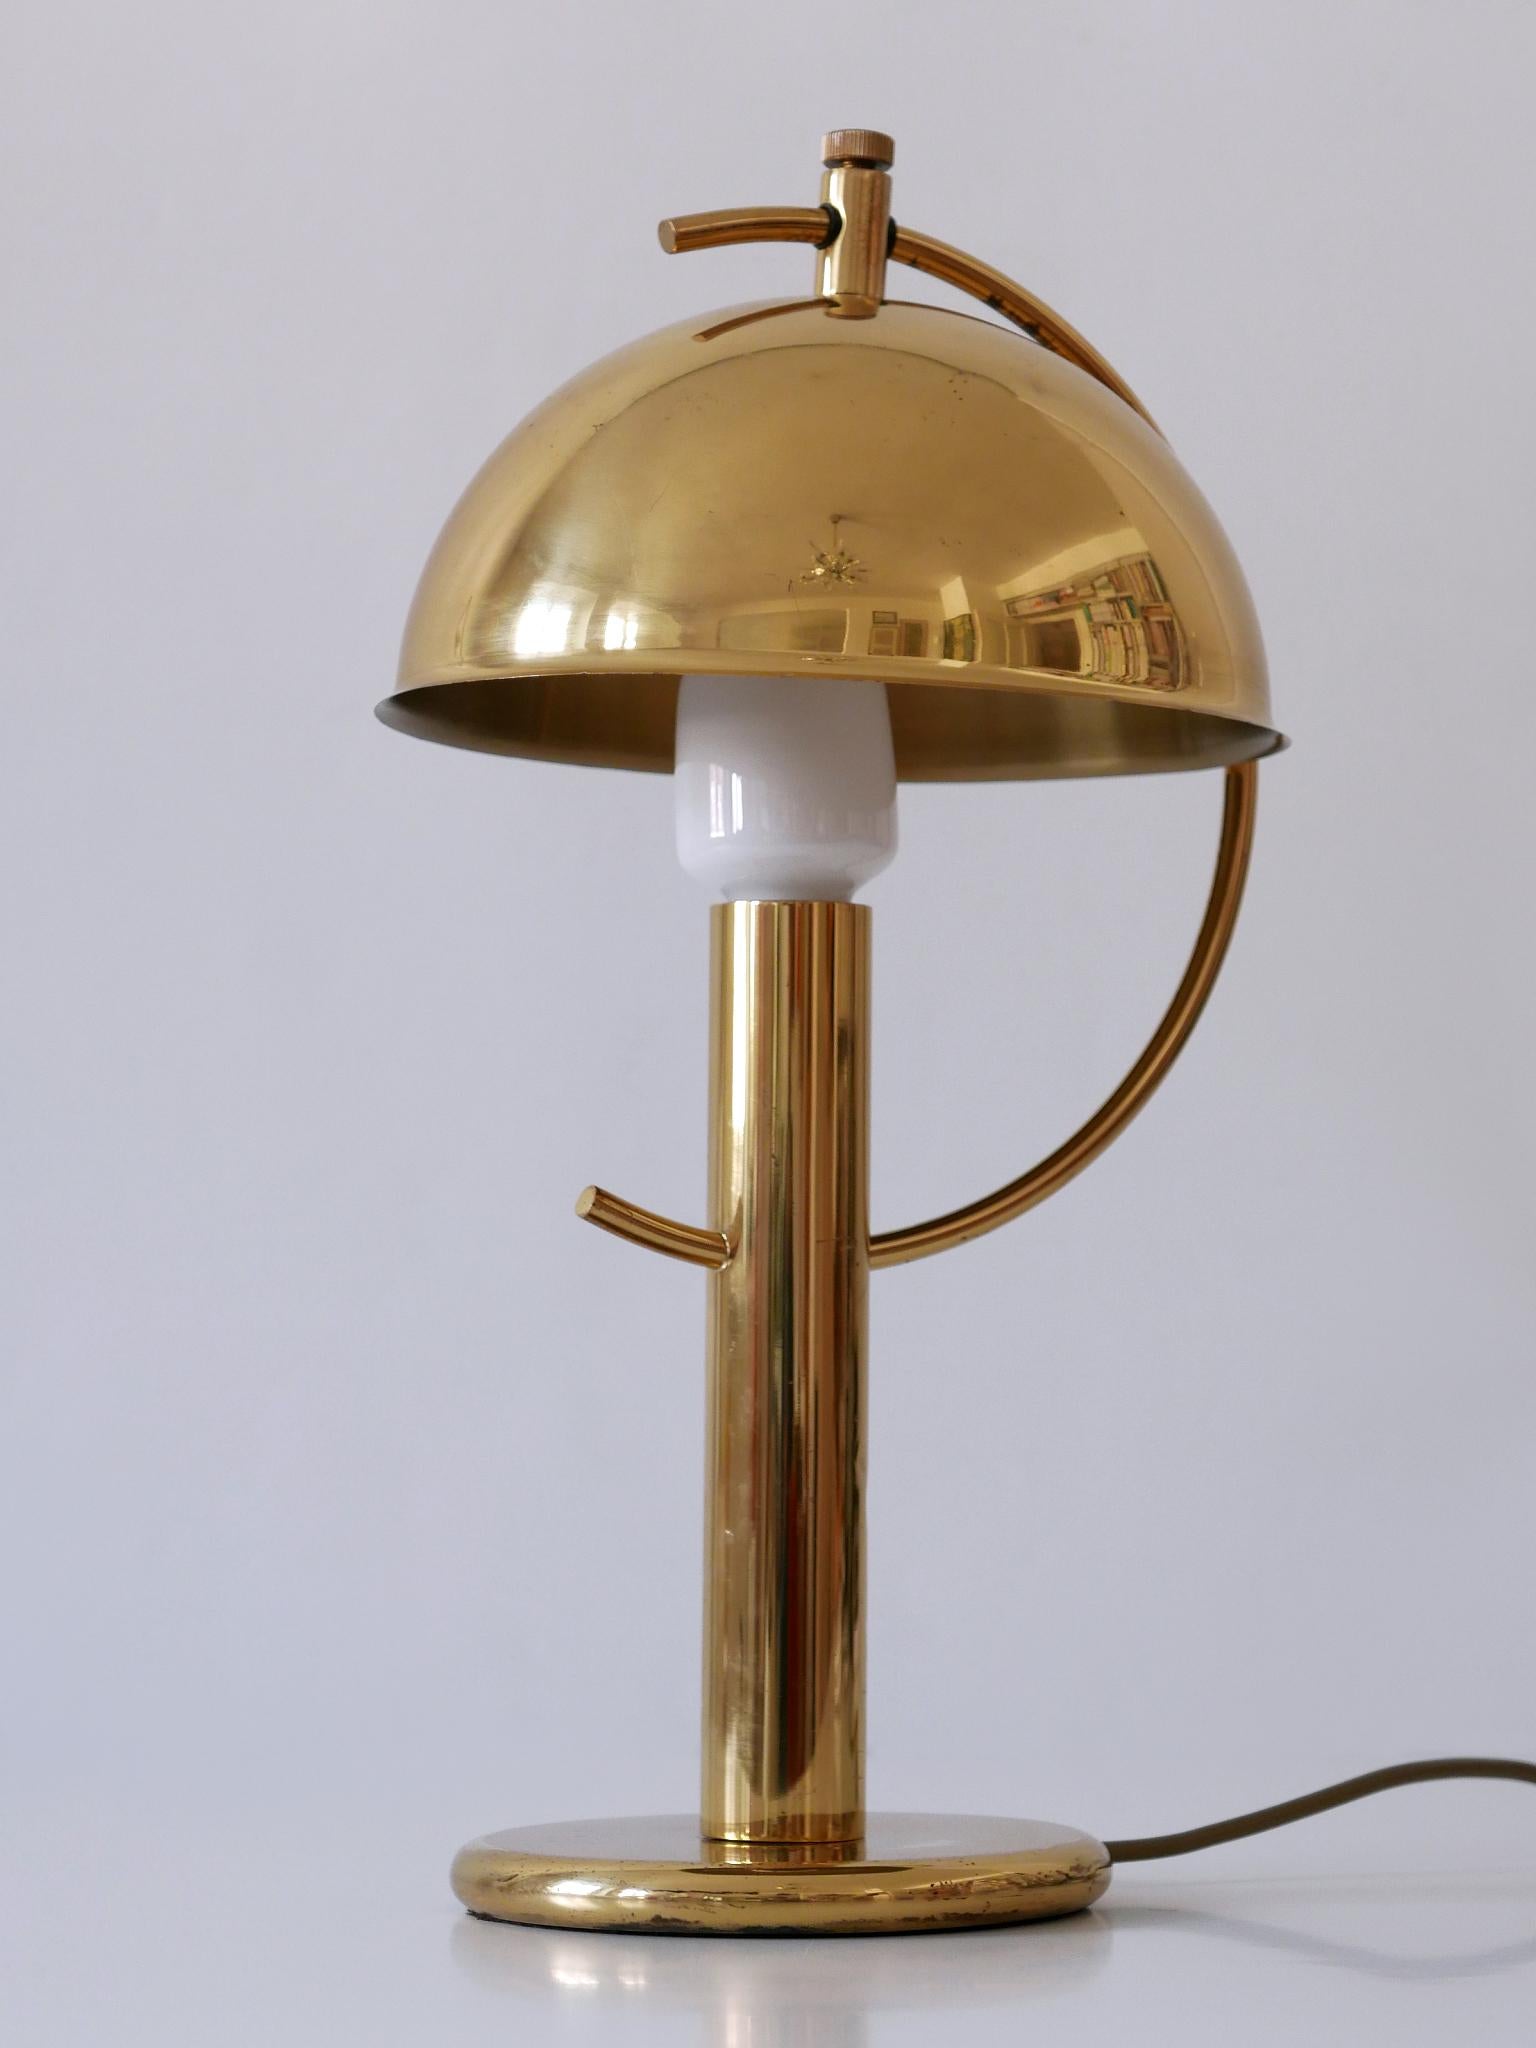 Exceptional Mid-Century Modern Brass Table Lamp by Gebrüder Cosack Germany 1960s For Sale 2